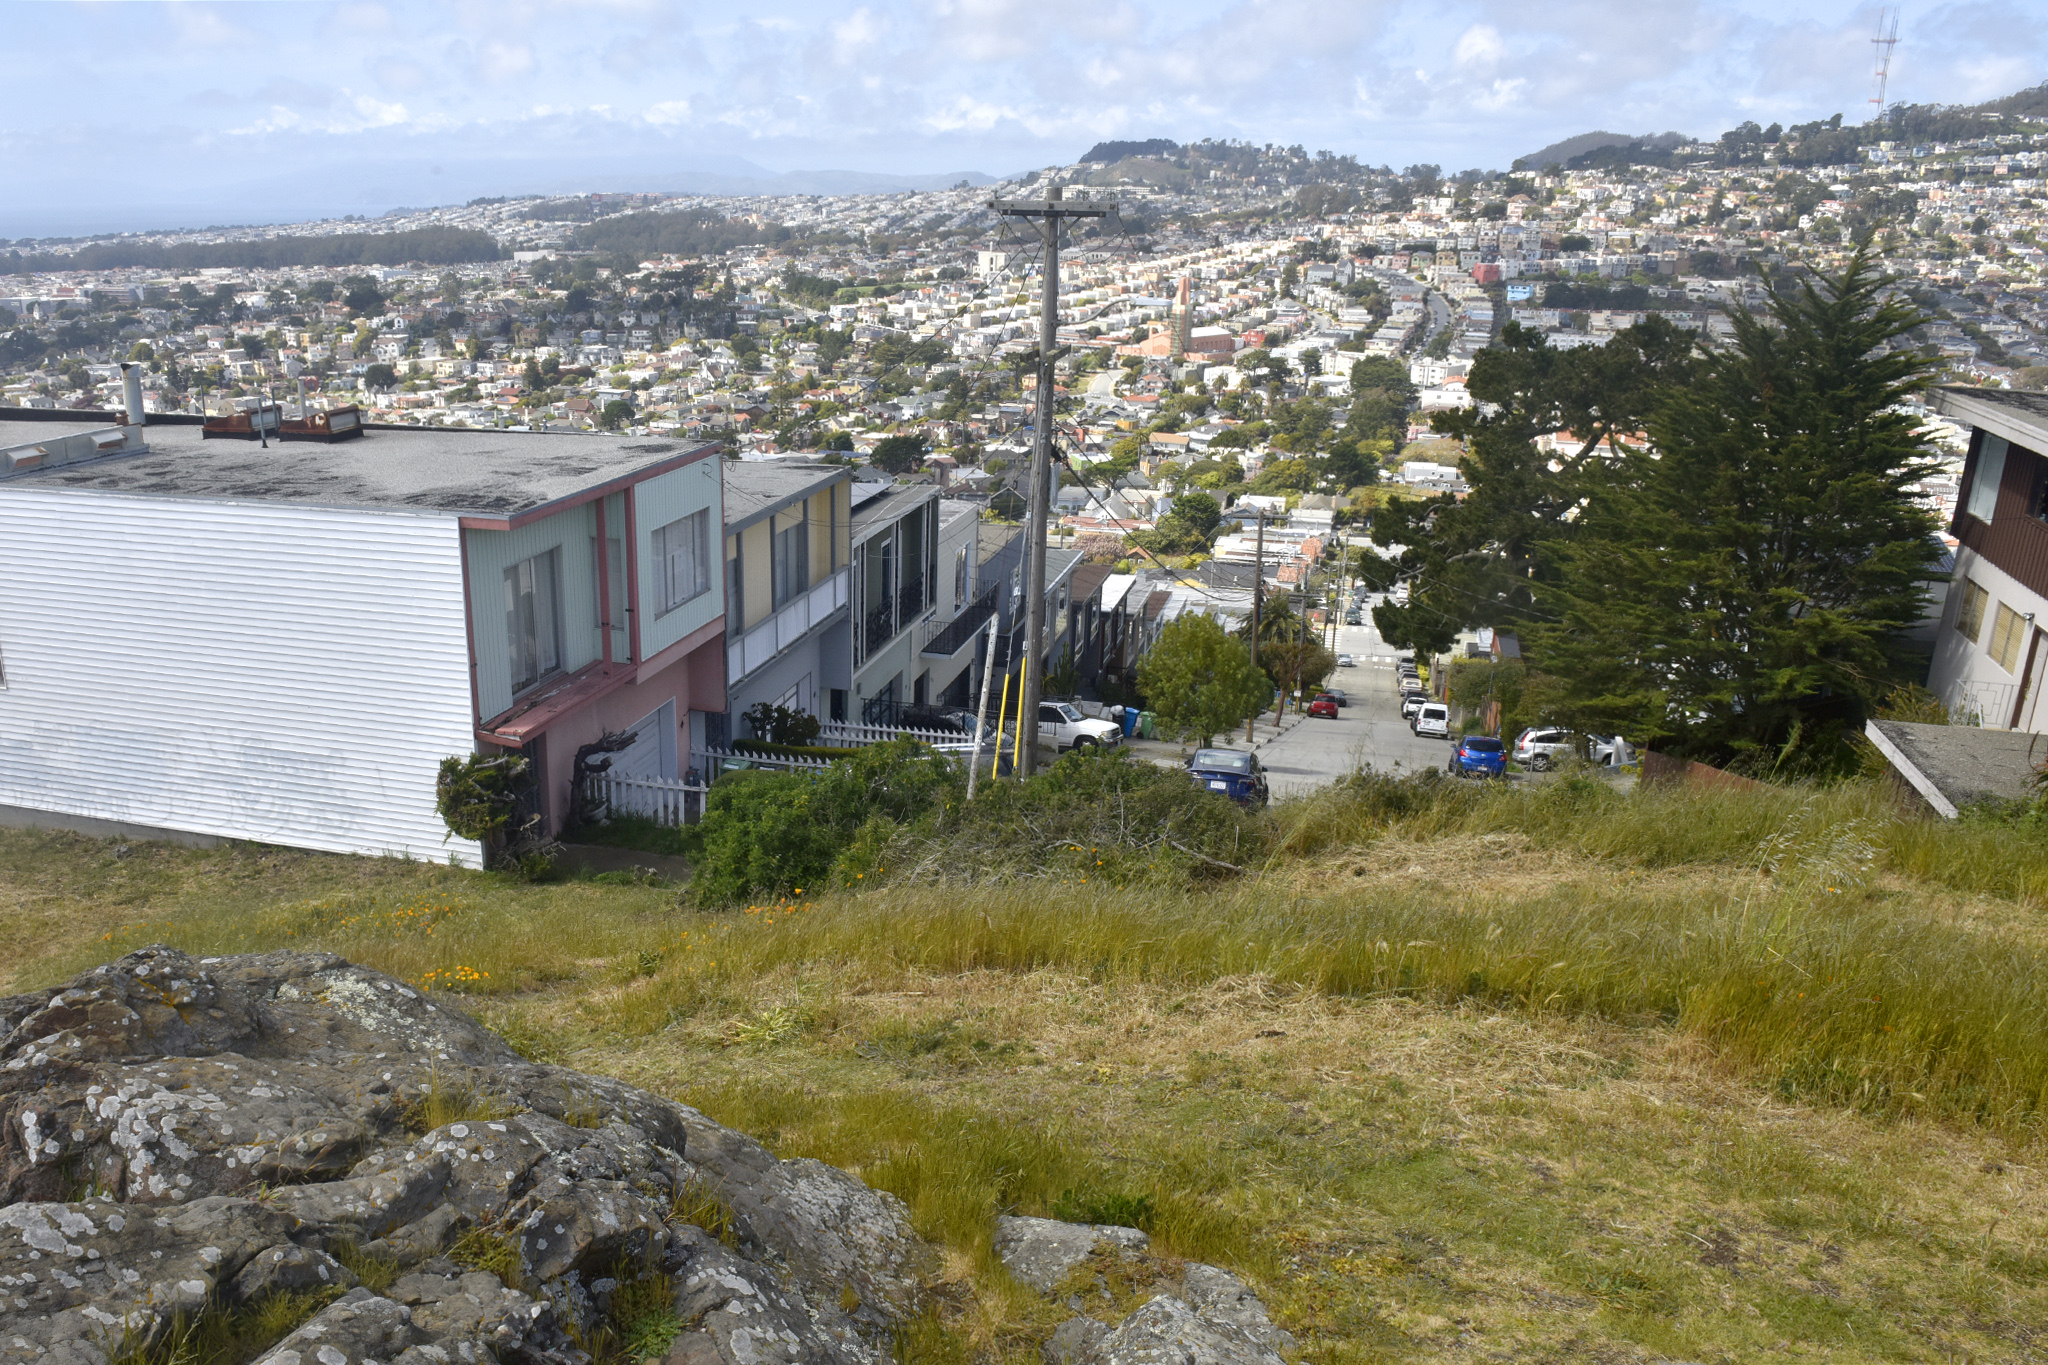 This secluded San Francisco park has some of the city’s best views